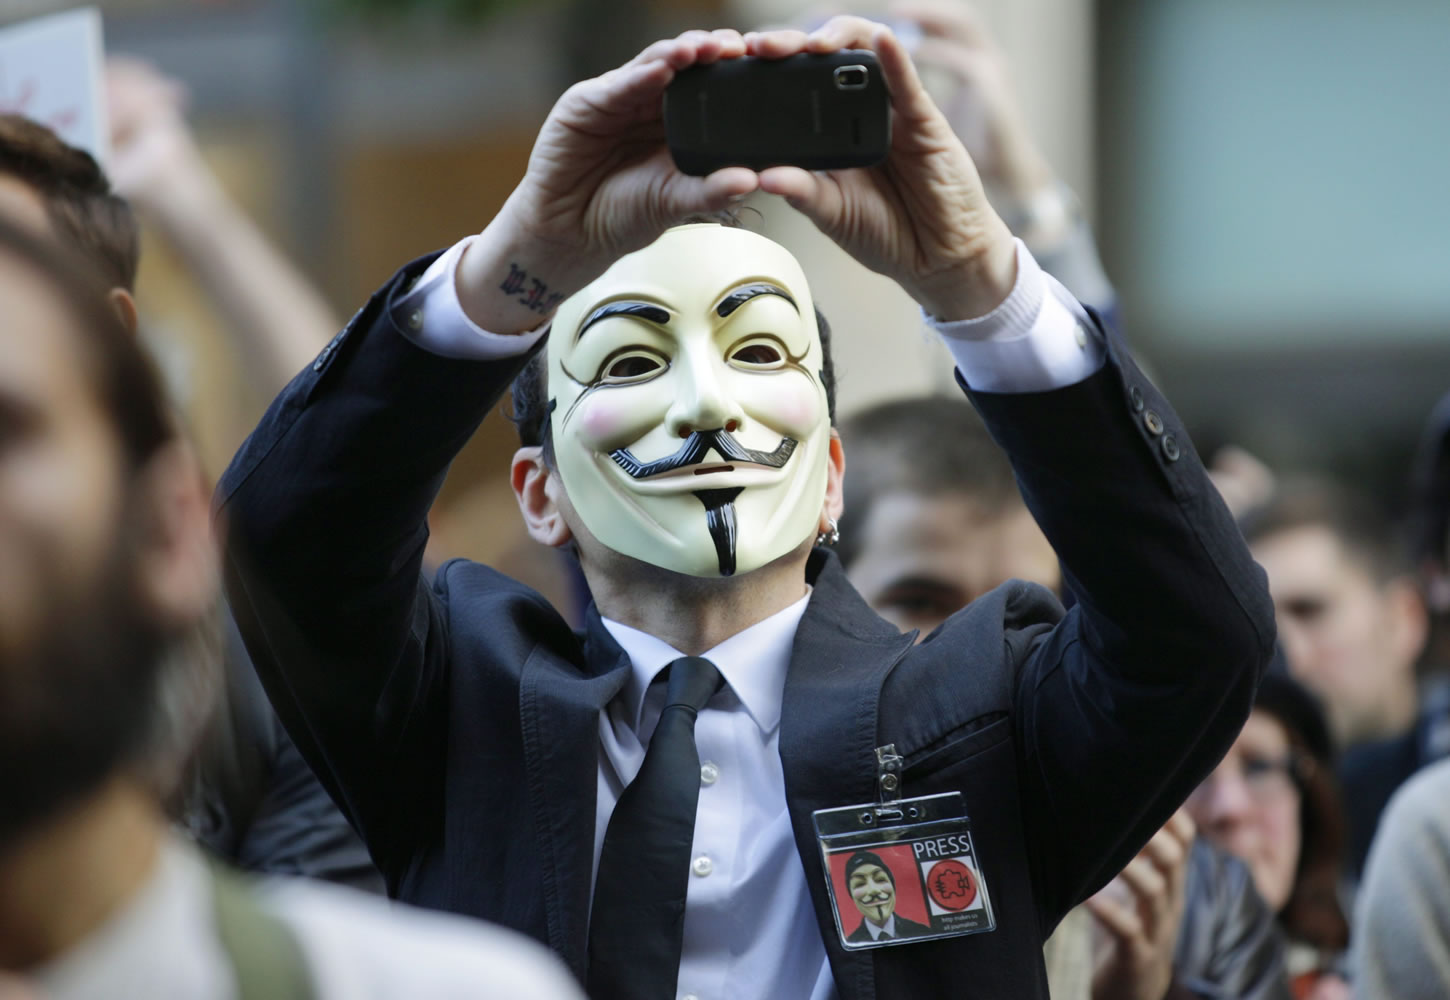 A protester with the &quot;Occupy Seattle&quot; movement wears a Guy Fawkes mask and takes a photo with a mobile phone as he demonstrates, in downtown Seattle. From New York to San Francisco to London, some of the demonstrators decrying a variety of society's ills are sporting stylized masks loosely modeled on a 17th-century English terrorist, whether they know it or not.